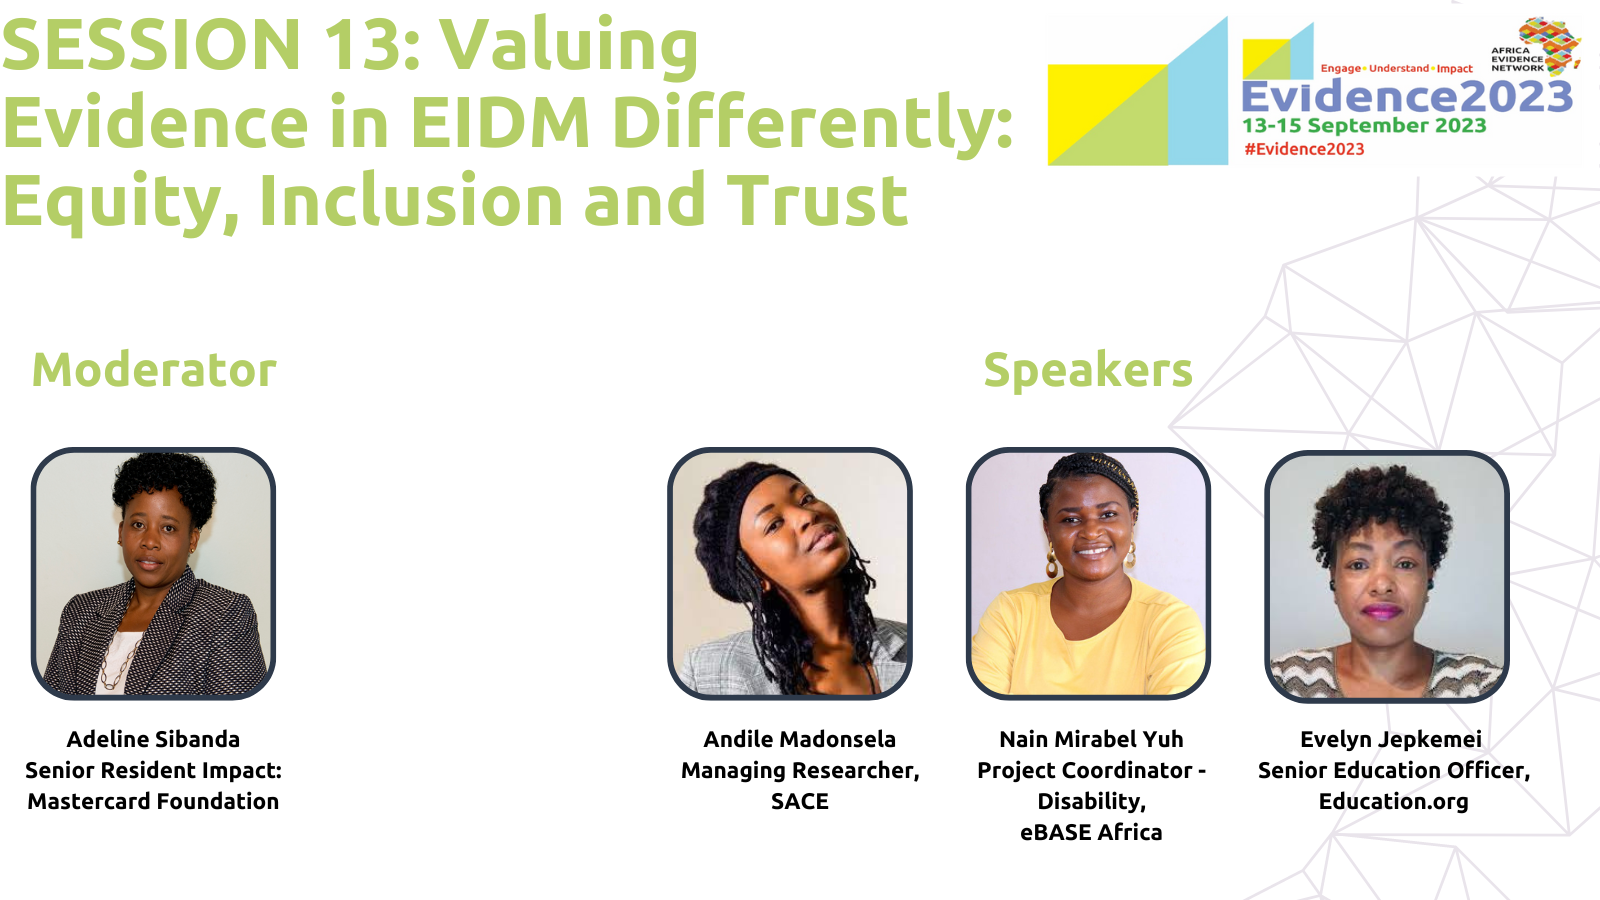 PRESENTATION | Valuing Evidence in EIDM Differently: Equity Inclusion and Trust - eBASE Africa